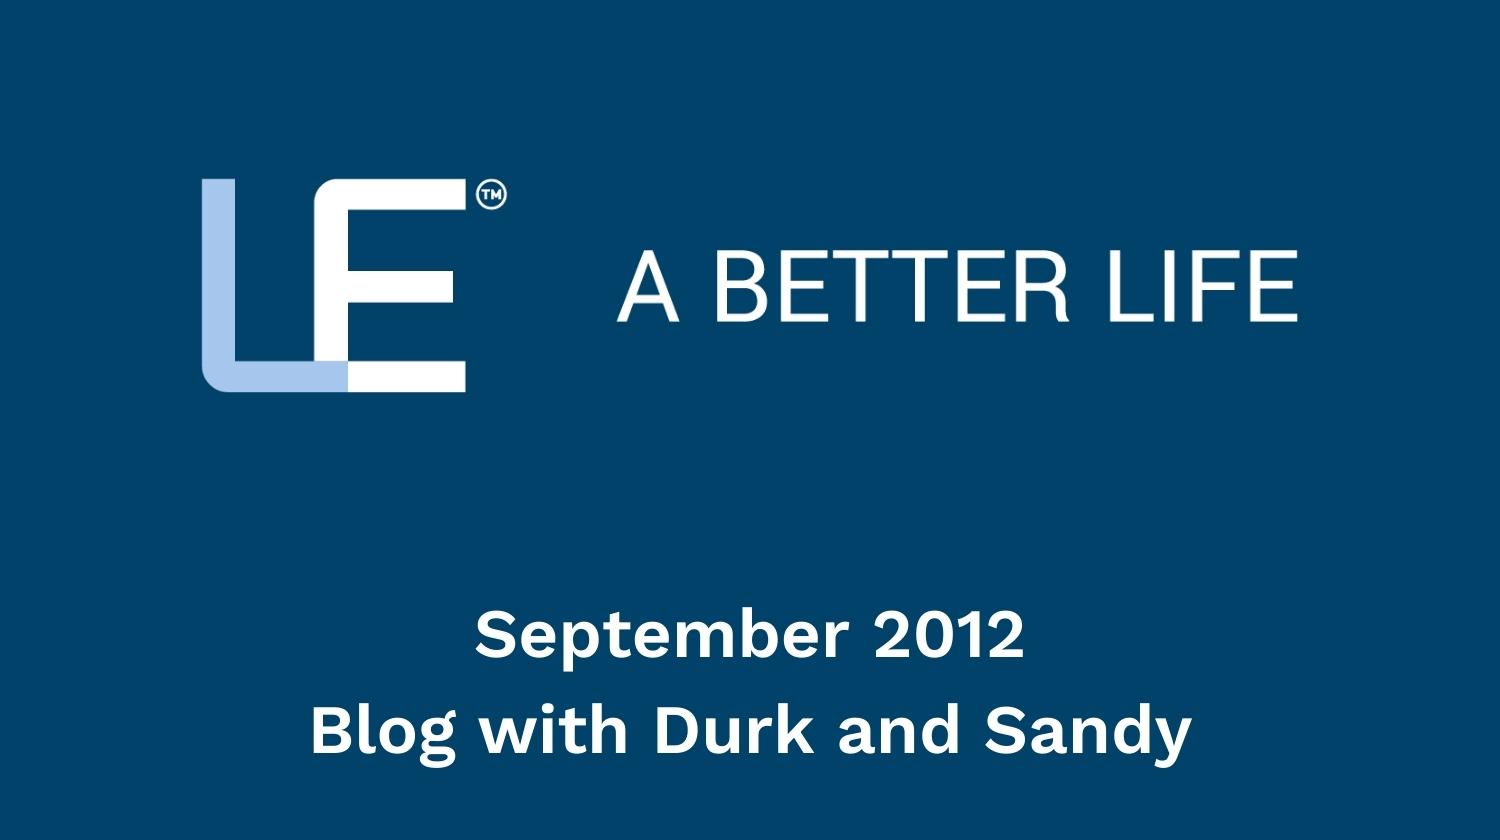 September 2012 Blog with Durk and Sandy